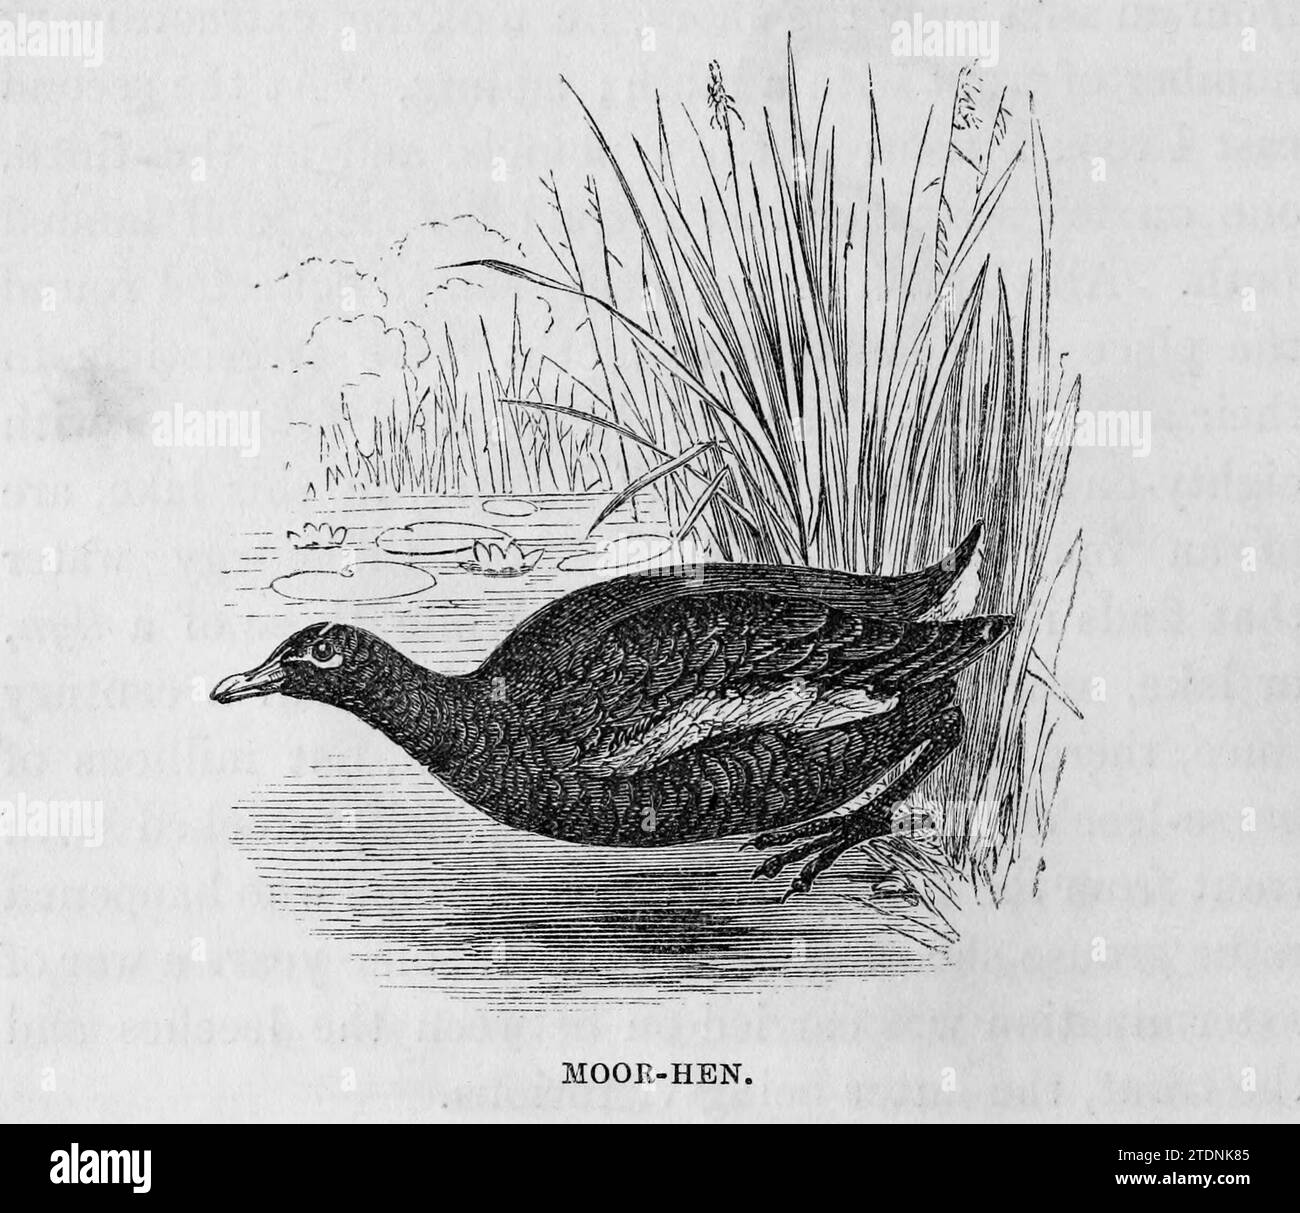 Moor-Hen from the book The Severn valley: a series of sketches, descriptive and pictorial, of the course of the Severn: containing notices of its topographical, industrial, and geological features; with glances at its historical and legendary associations by Randall, John, 1810-1910 Publication date 1862 Publisher J. S. Virtue Stock Photo